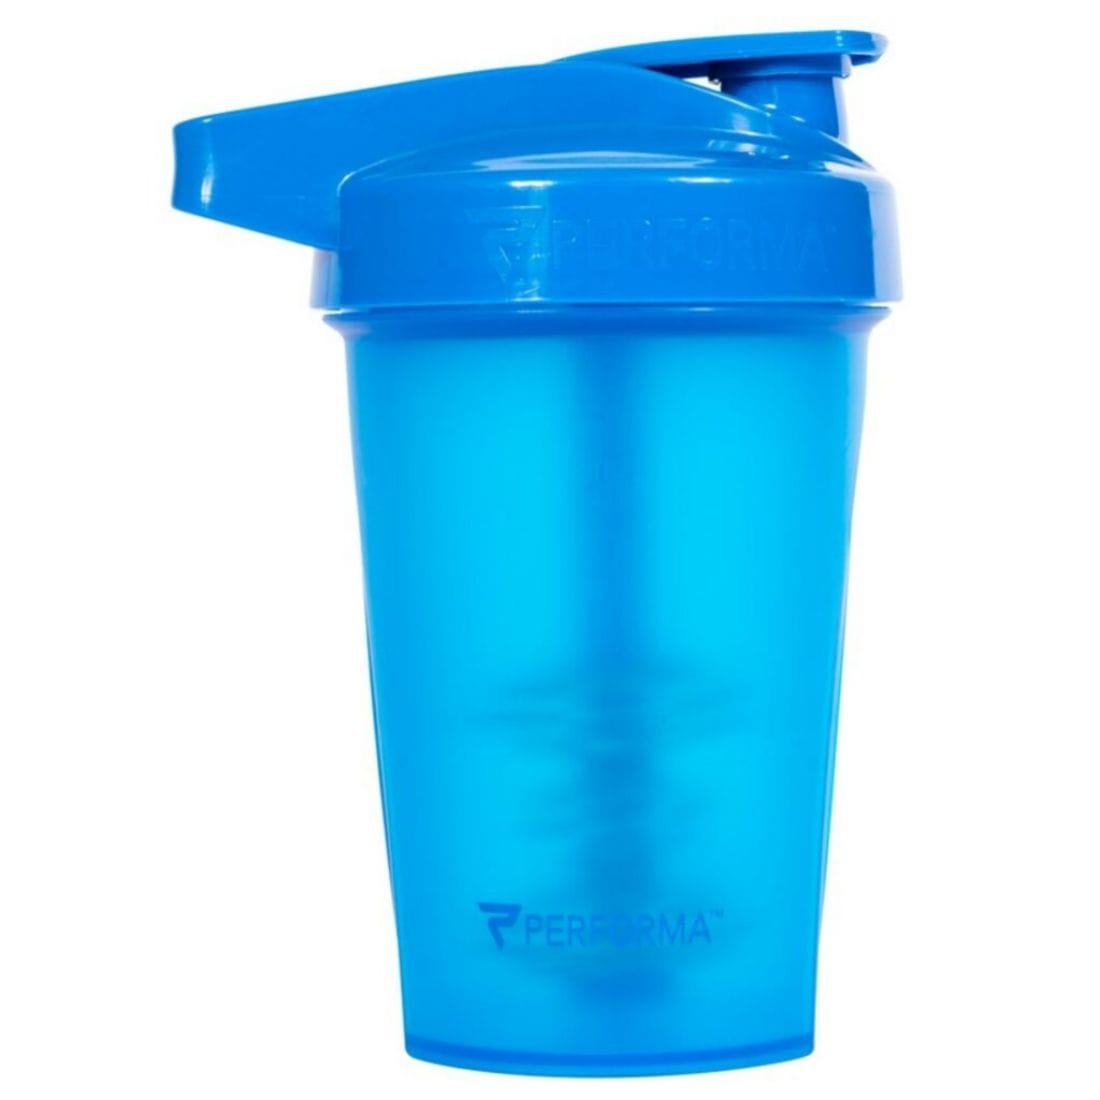 PERFORMA Activ Shaker Cup, 591ml